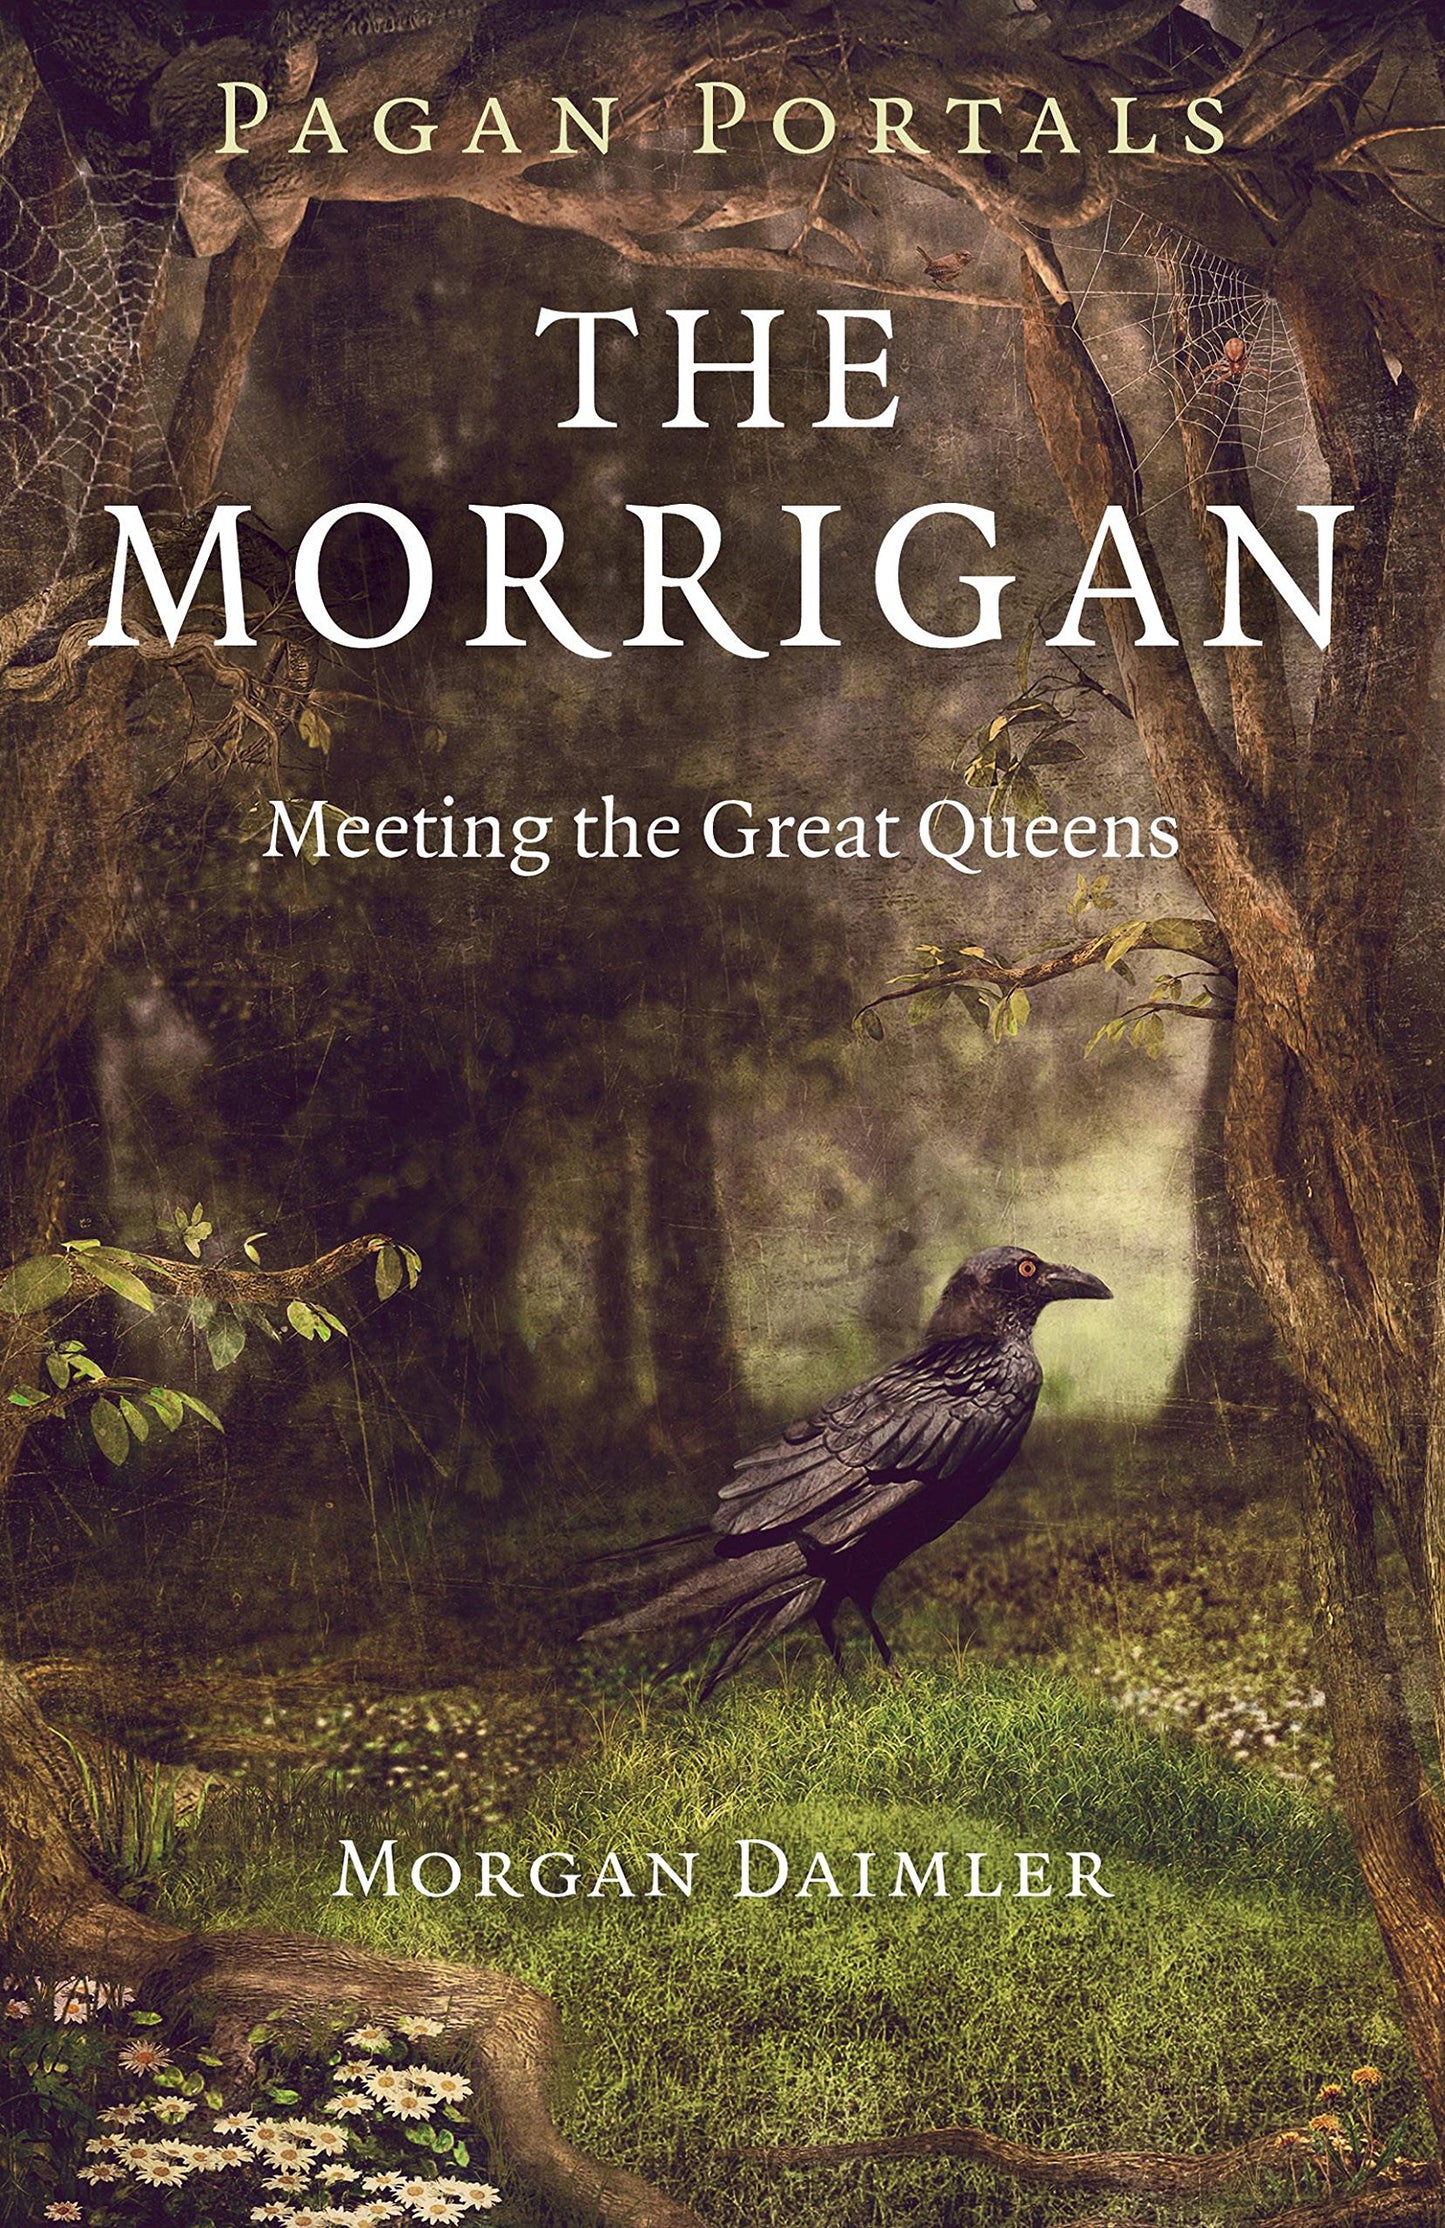 The Morrigan | Meeting the Great Queens by Morgan Daimler